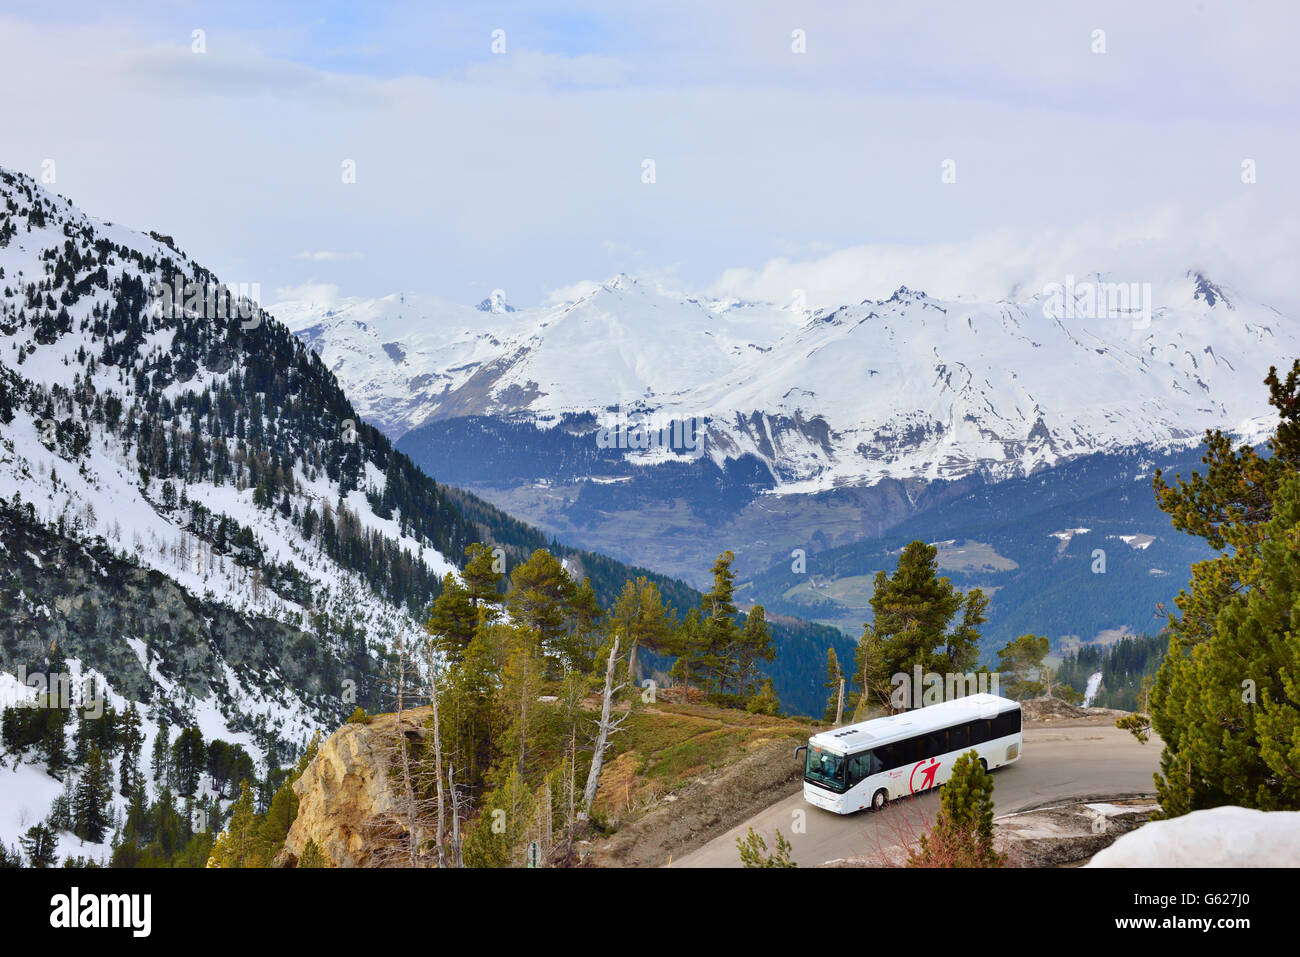 Mountain road with bus in resort of Les Arcs, France Stock Photo